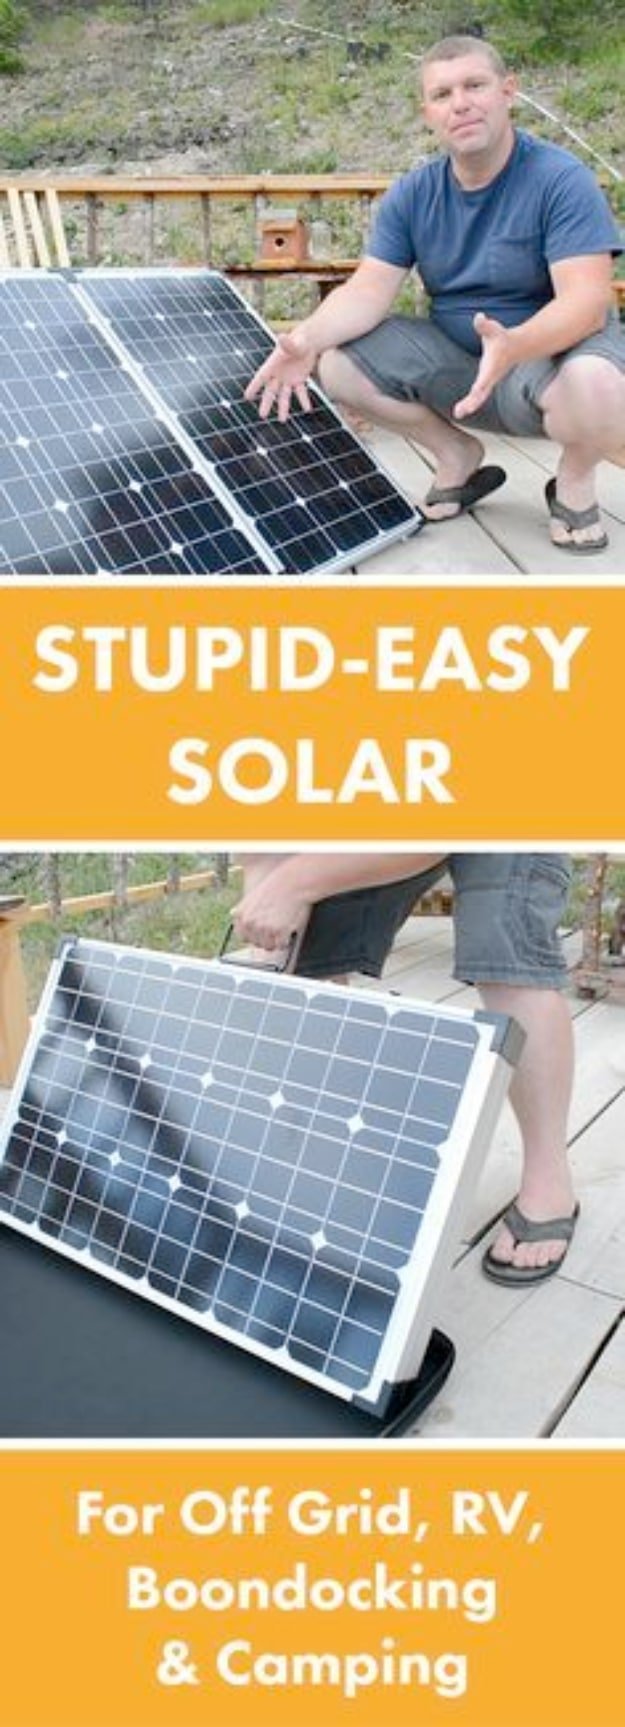 DIY Solar Powered Projects - Easy Portable Solar Panels - Easy Solar Crafts and DYI Ideas for Making Solar Power Things You Can Use To Save Energy - Step by Step Tutorials for Making Things Without Batteries - DIY Projects and Crafts for Men and Women 